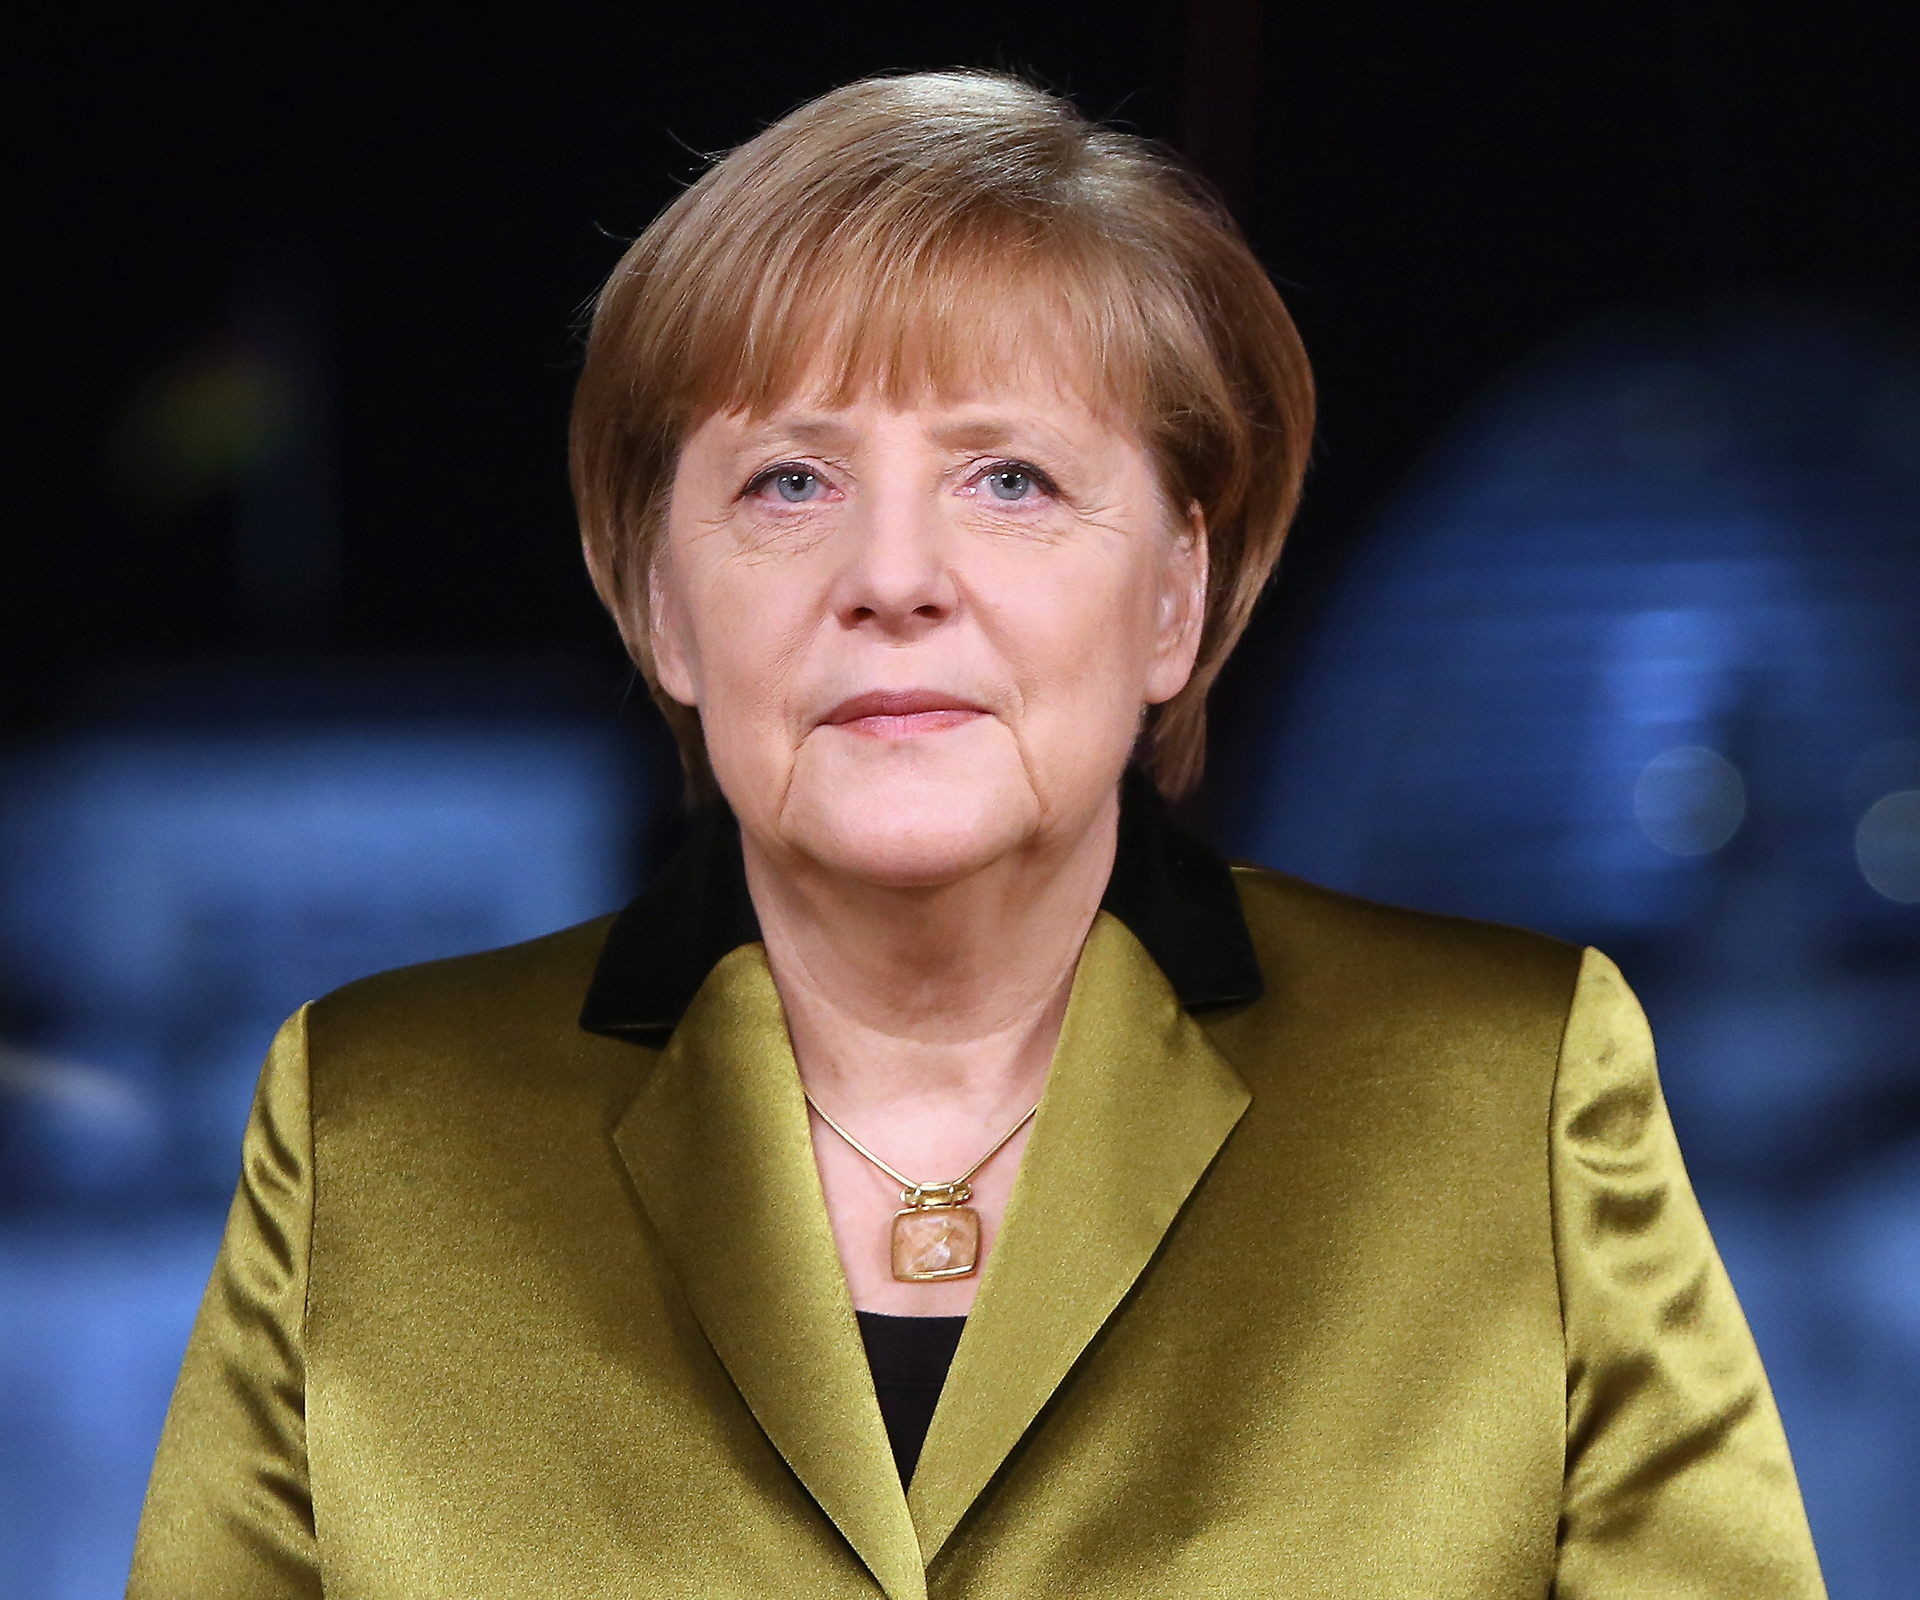 Chancellor Angela Merkel named TIME’s first female Person of the Year since 1986